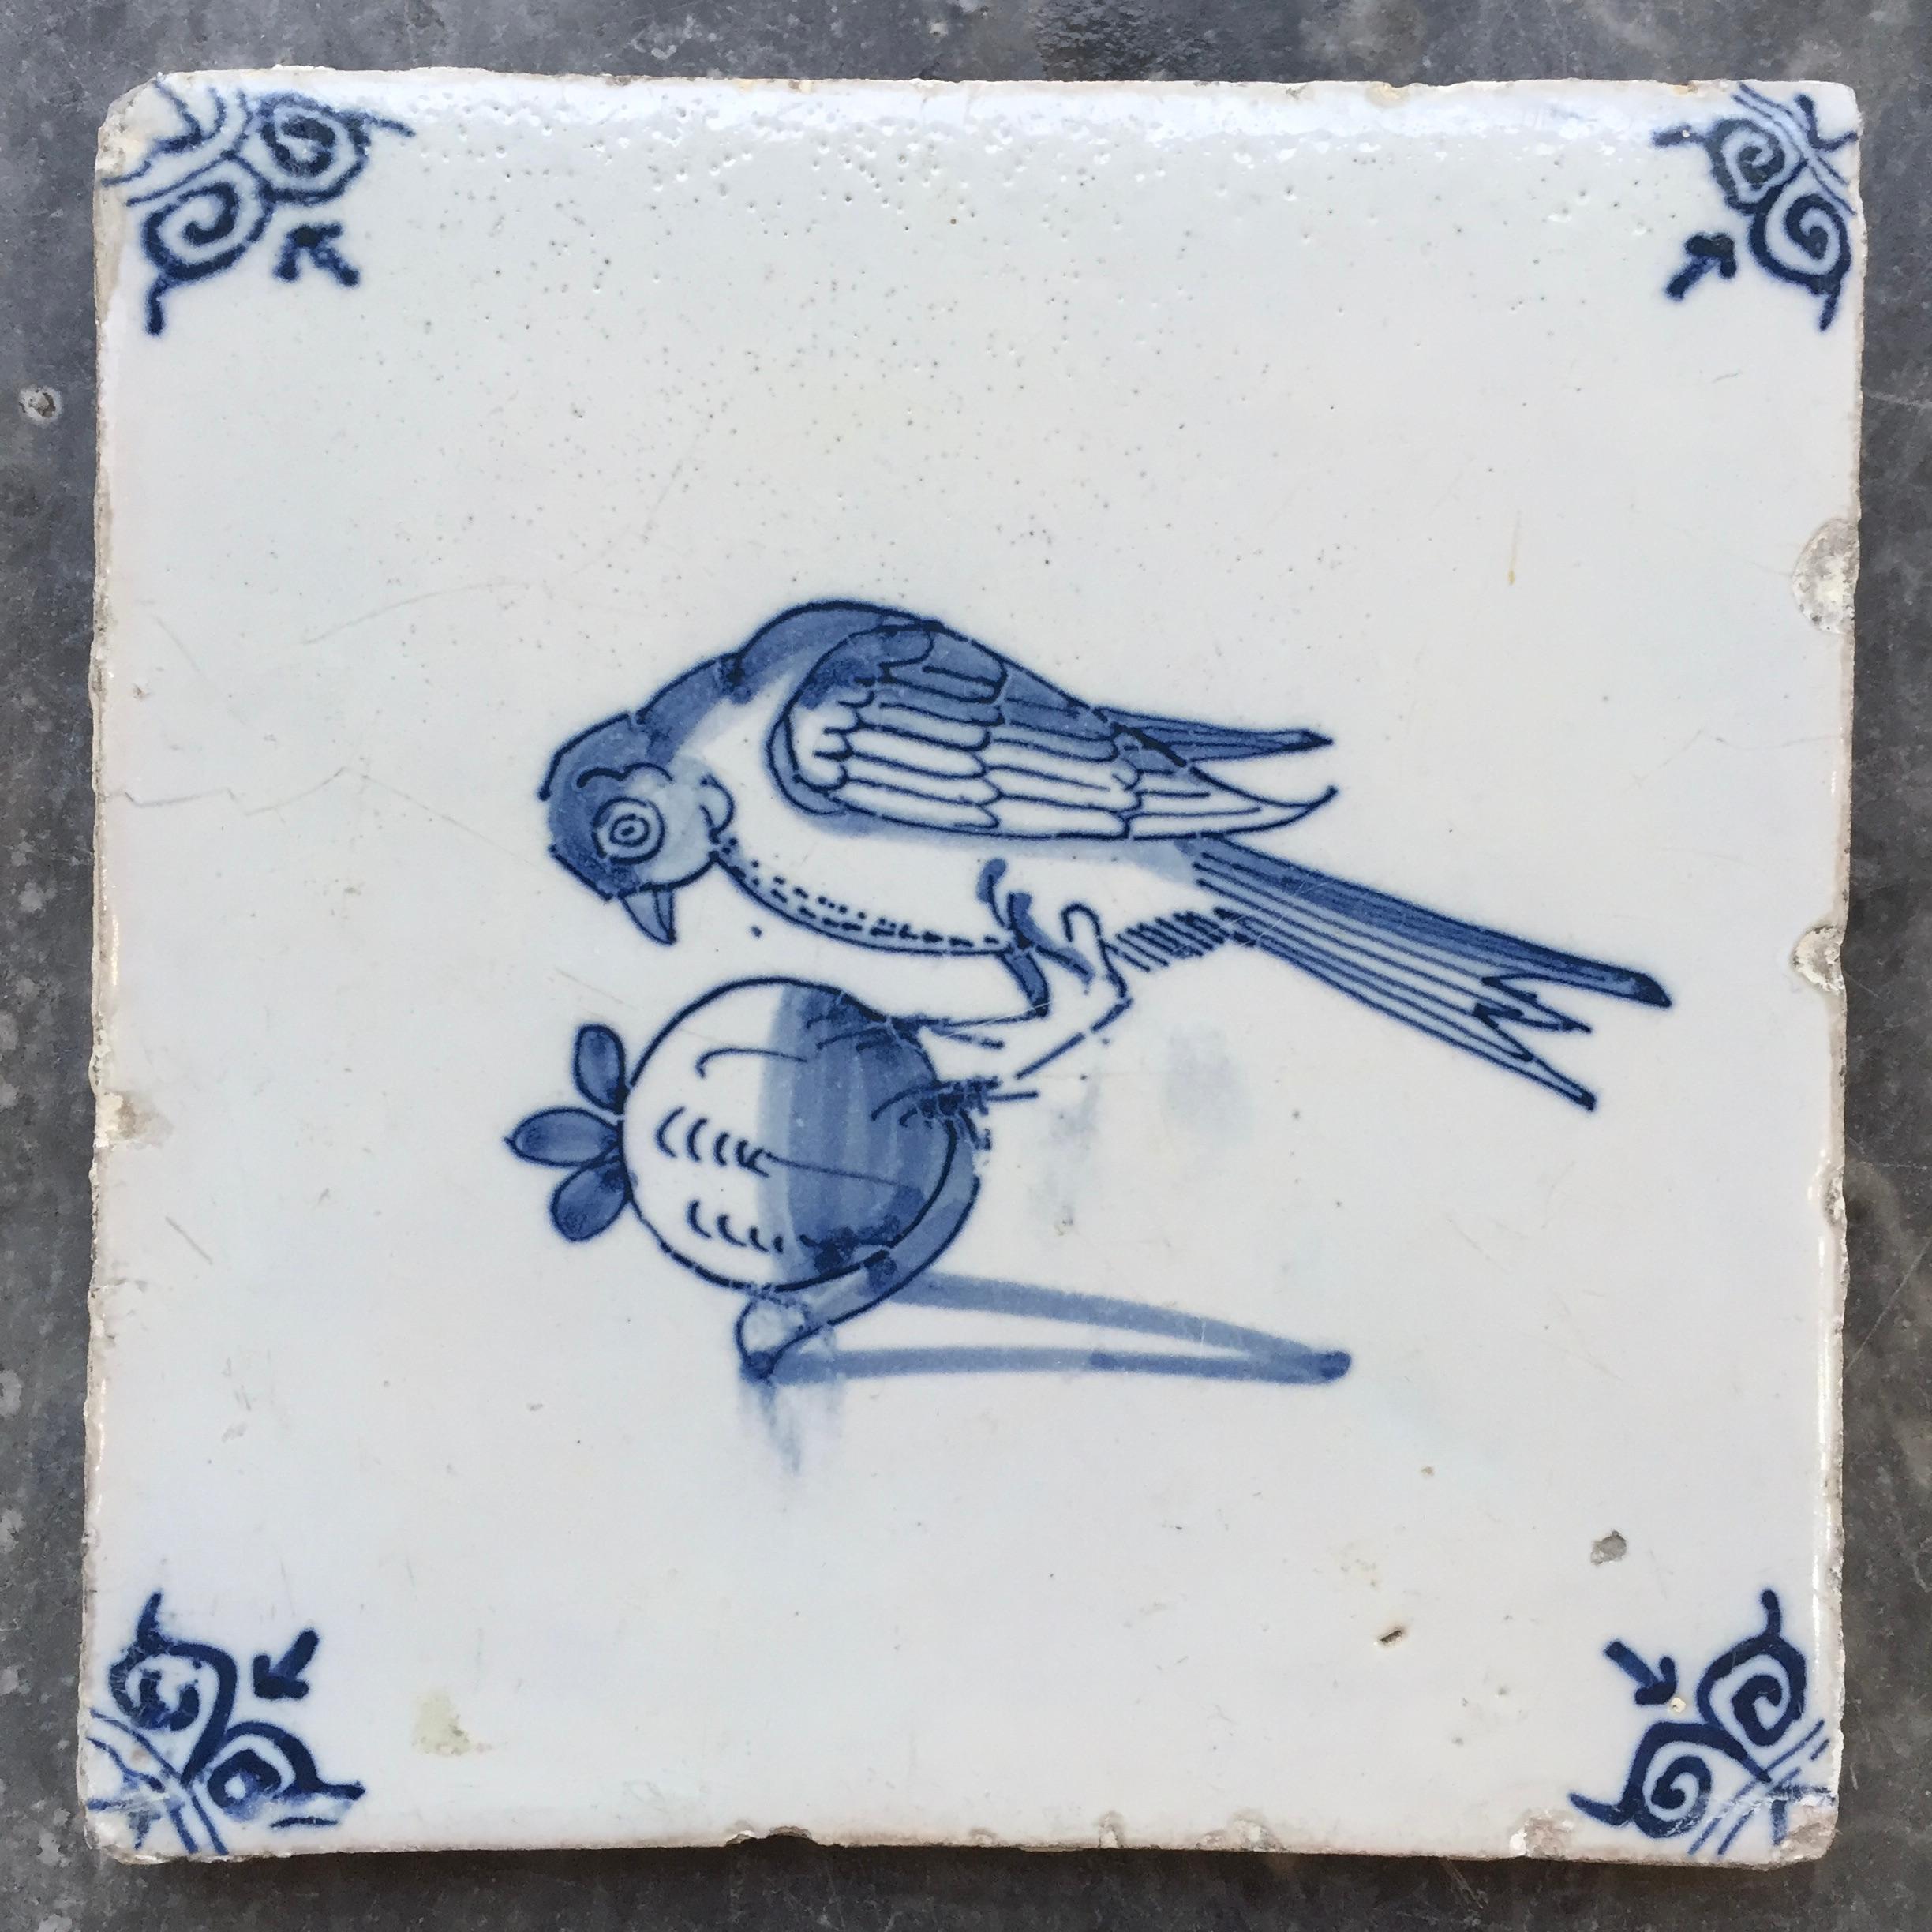 The Netherlands
Circa 1630 - 1660

A fine painted blue and white tile with a decoration of a bird on a piece of fruit.
With so-called oxheads as corner decoration.

A genuine collectible of approximately 400 years old.